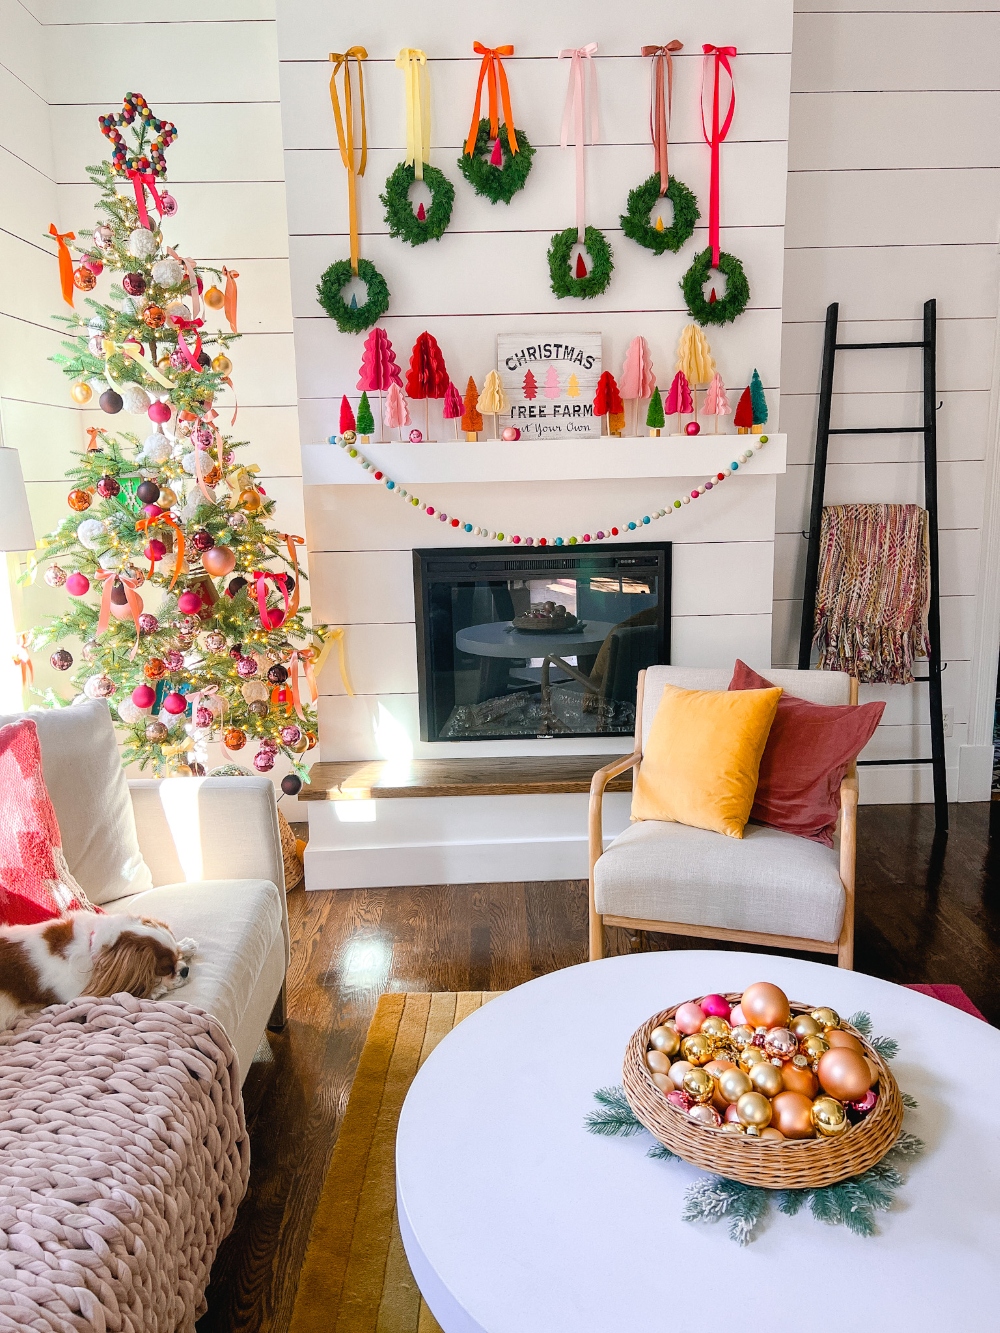 Eclectic Home Tour - Christmas at Tatertots and Jello - Kelly Elko